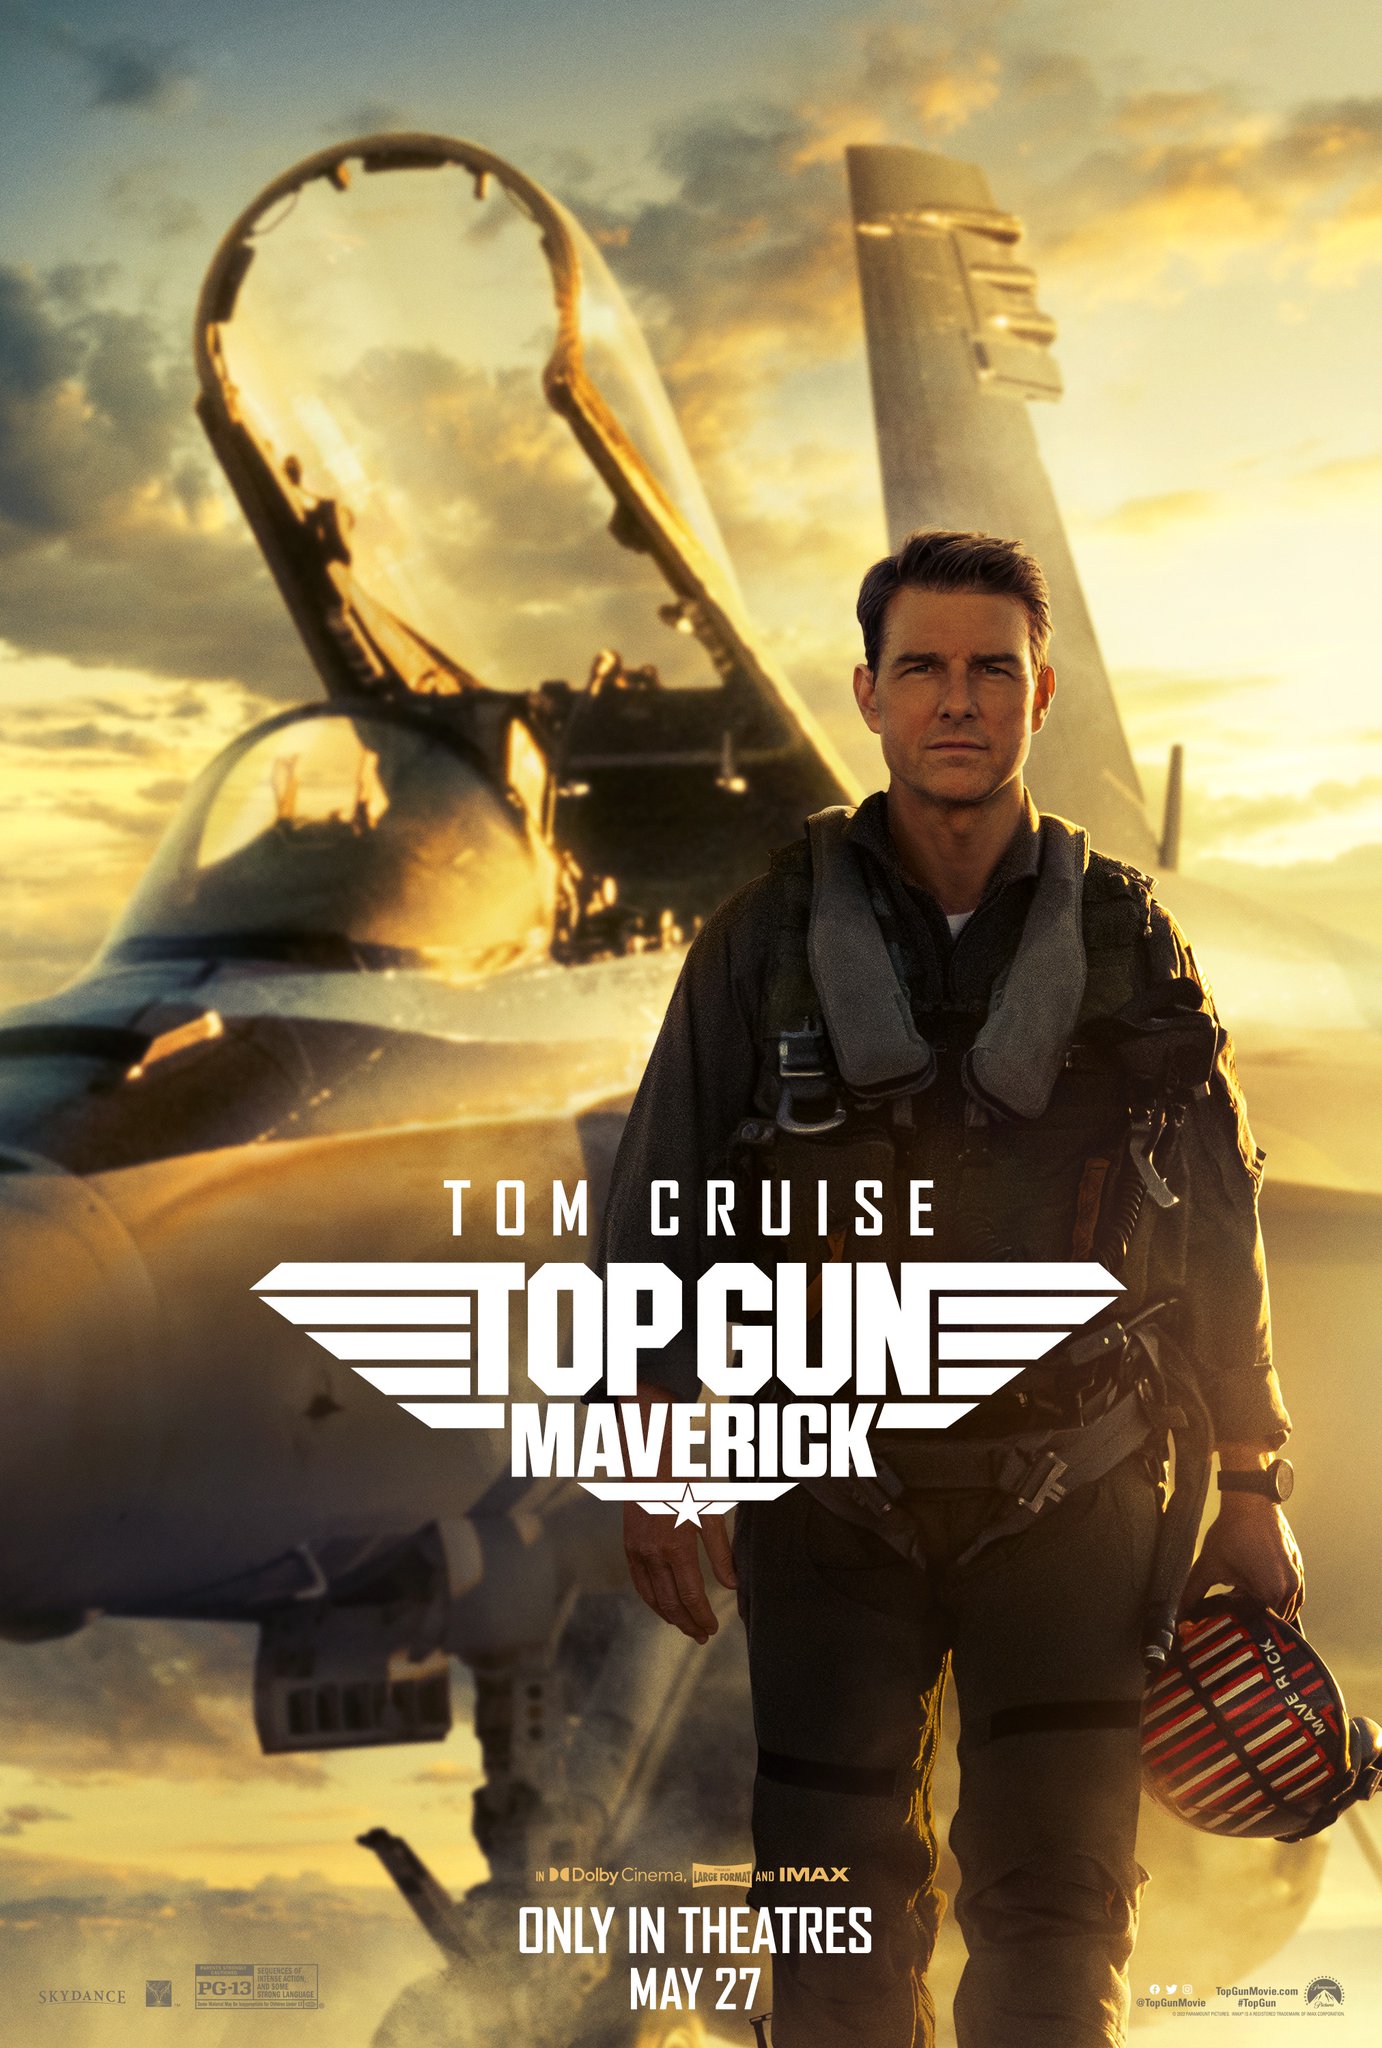 Twitter 上的Top Gun："You've waited long enough. #PrepareForTakeoff, the new trailer premieres now. #TopGun: Maverick - only in theatres May 27. https://t.co/C5PchbHs39" / Twitter